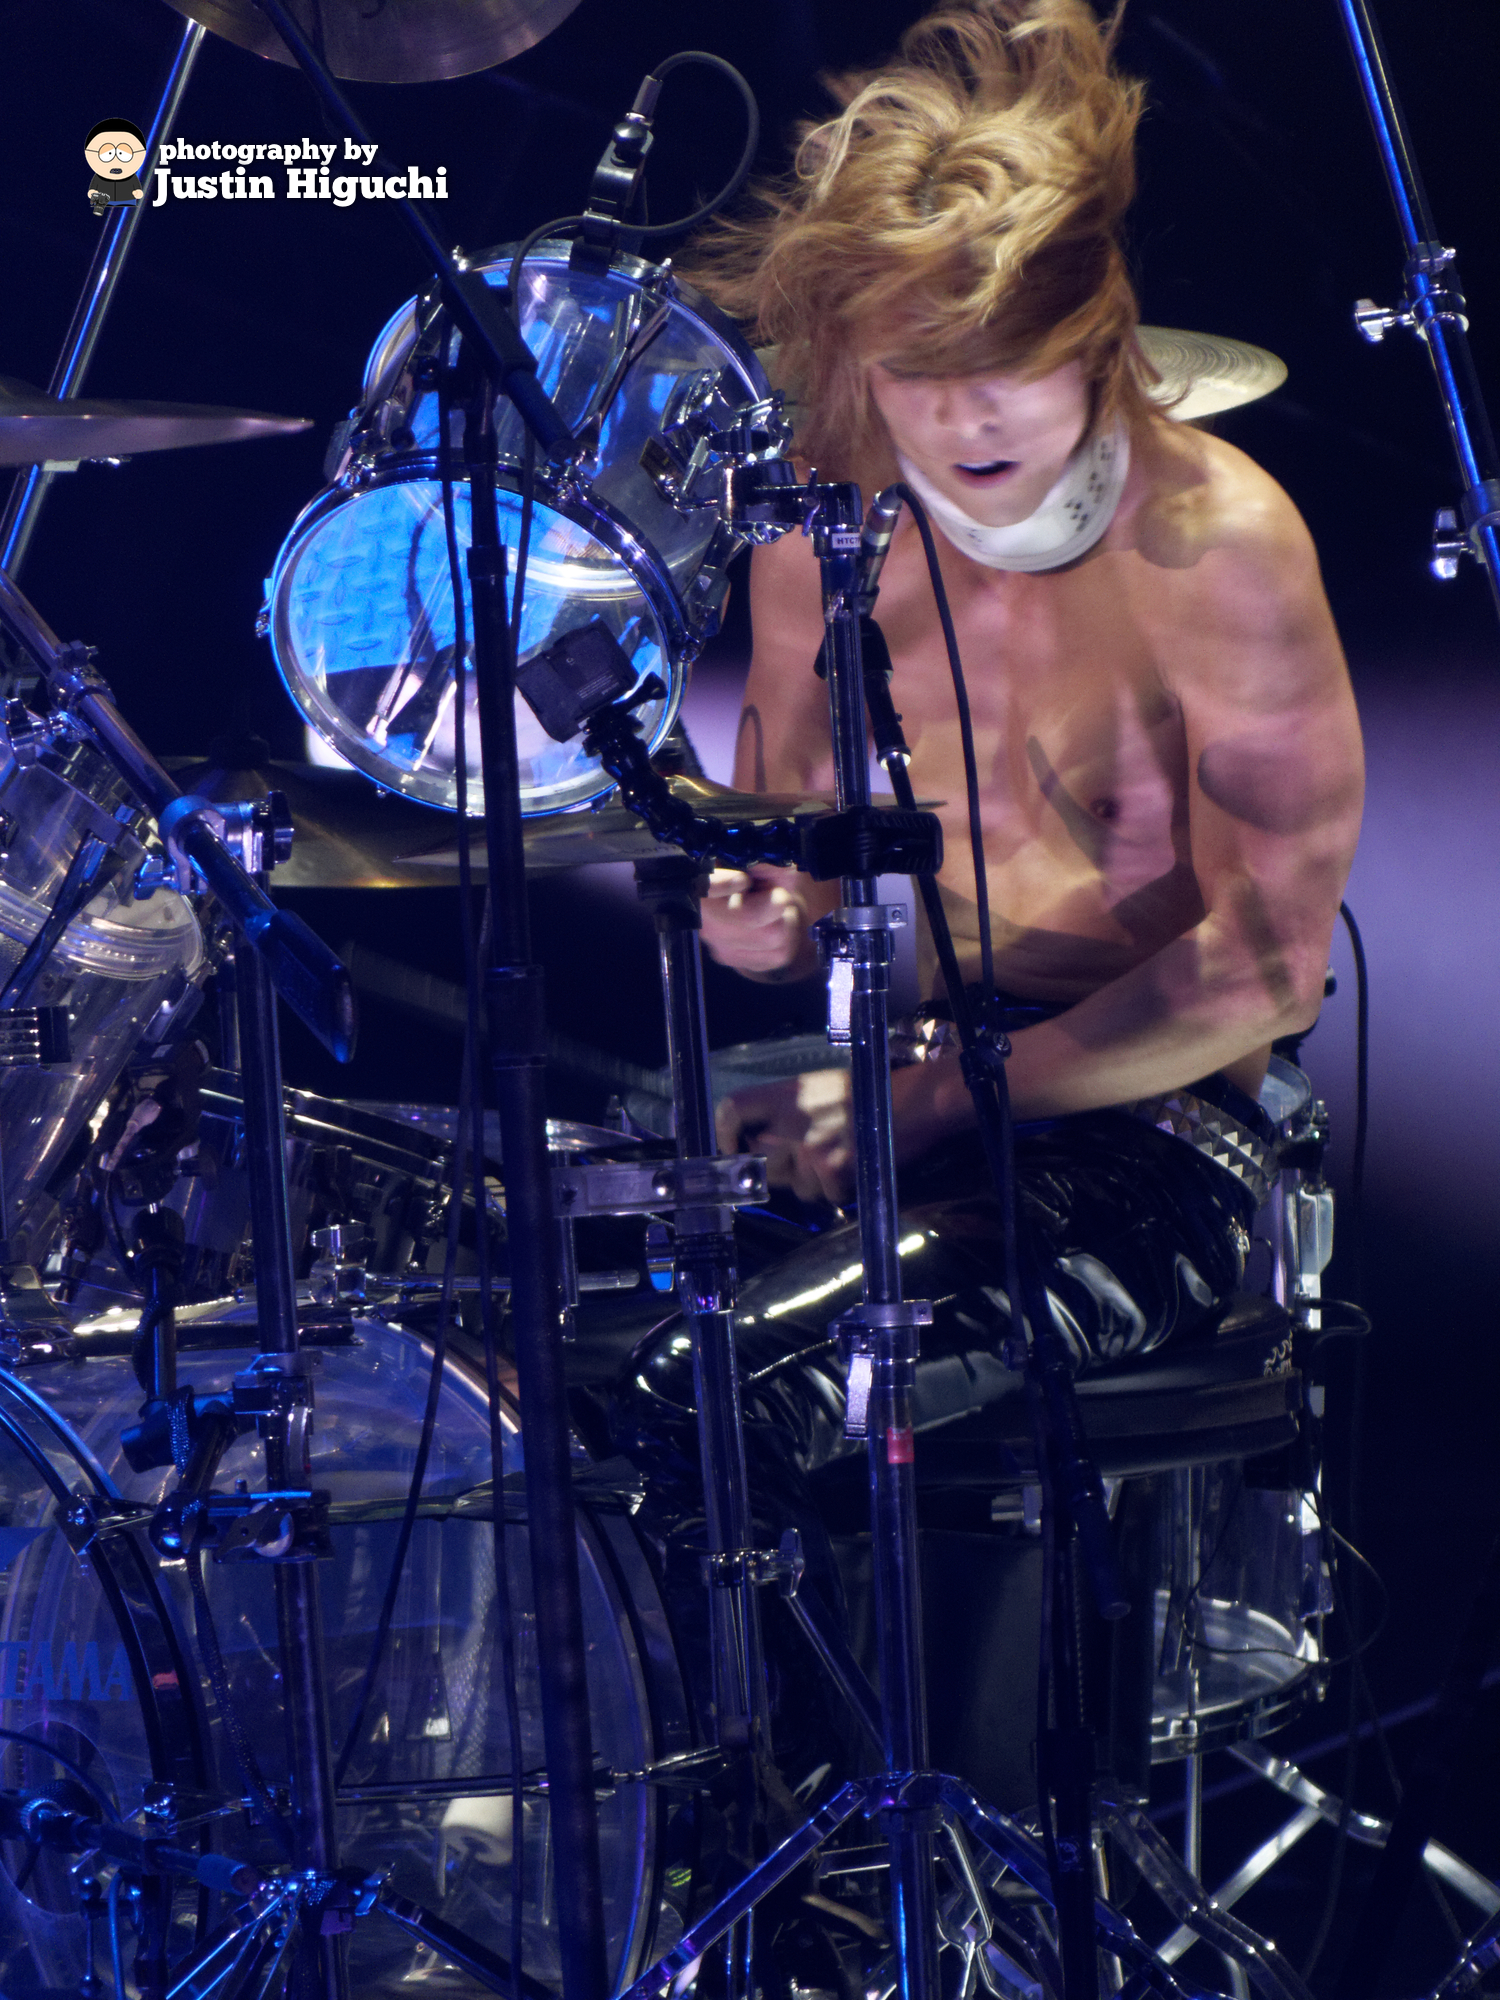 a shirtless man playing drums on stage